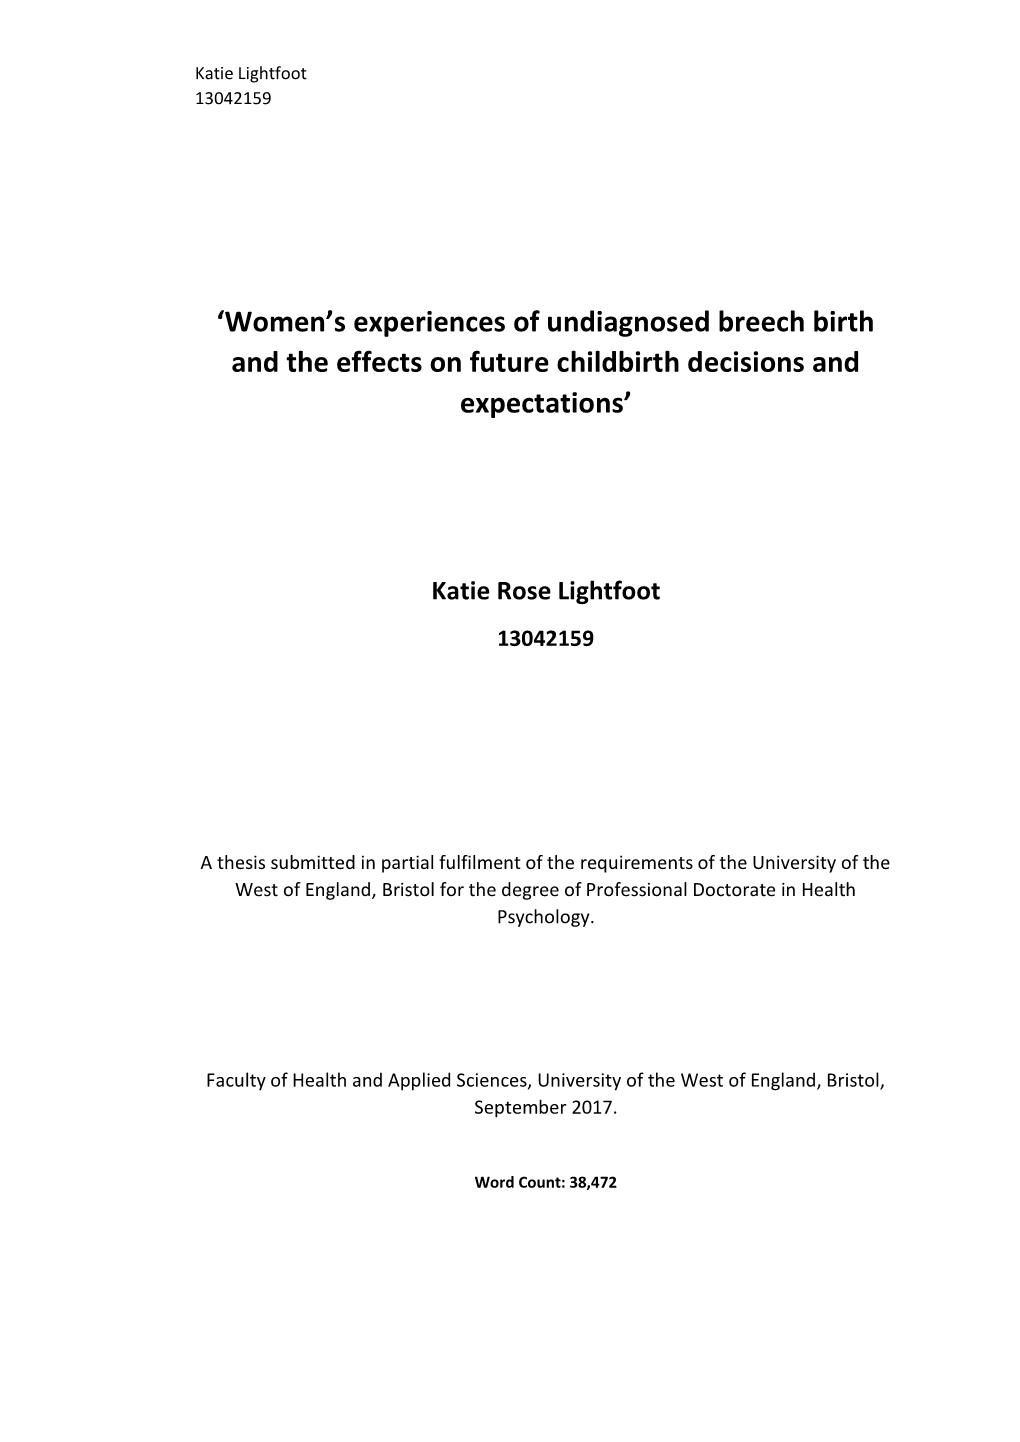 'Women's Experiences of Undiagnosed Breech Birth and the Impact on Future Childbirth Decisions and Expectations'